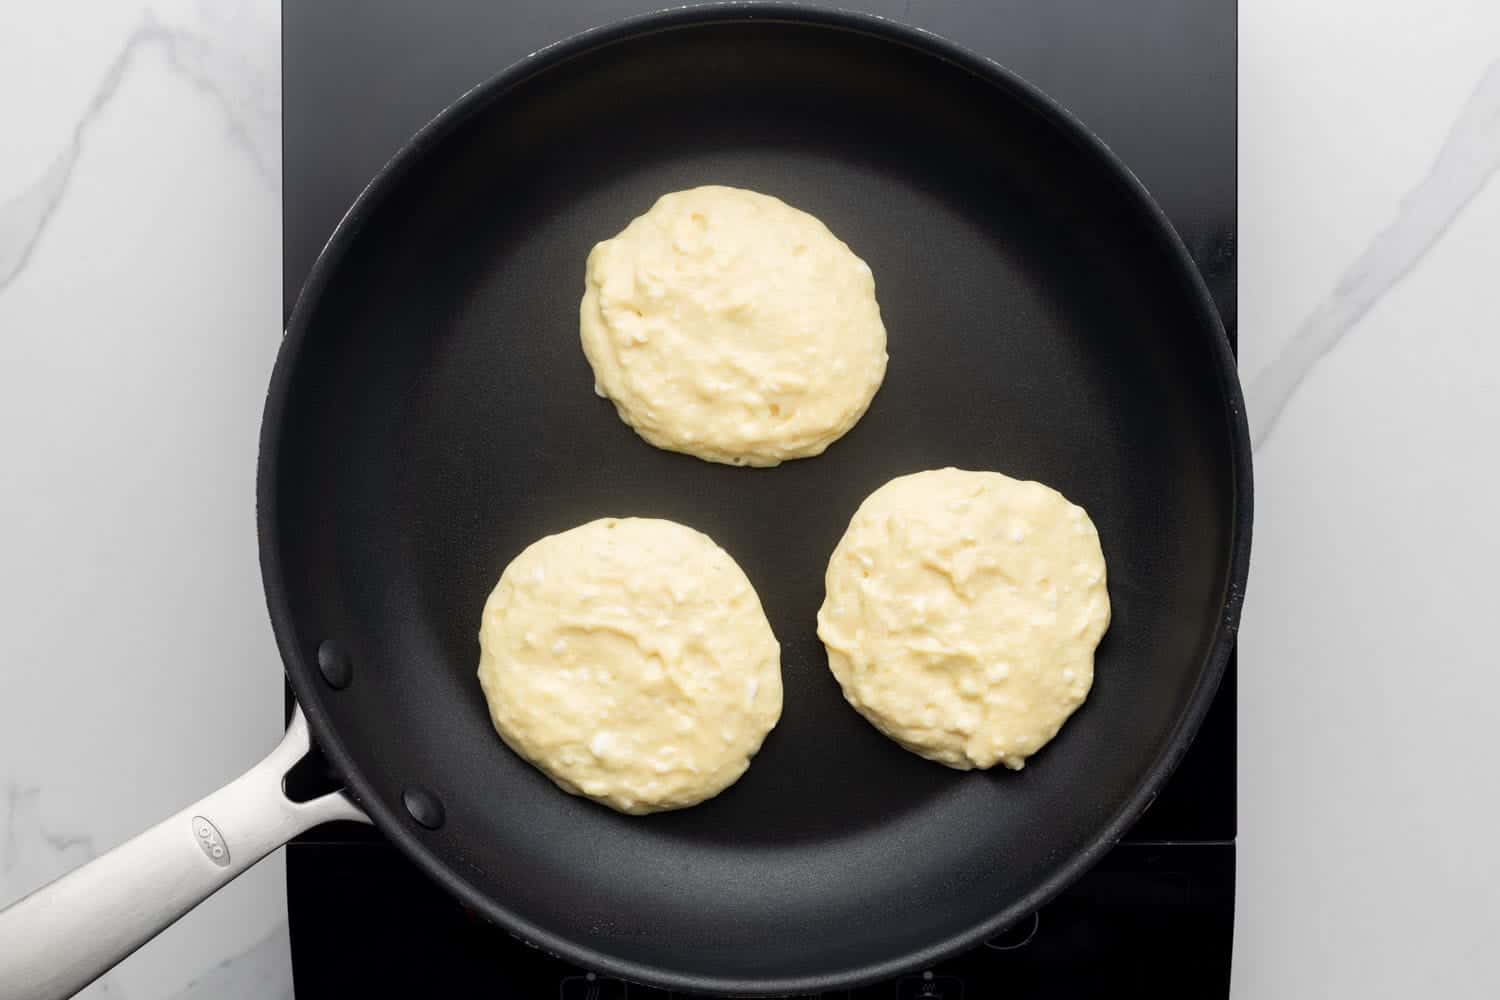 a black non-stick skillet holding three uncooked pancakes with cottage cheese in the batter.